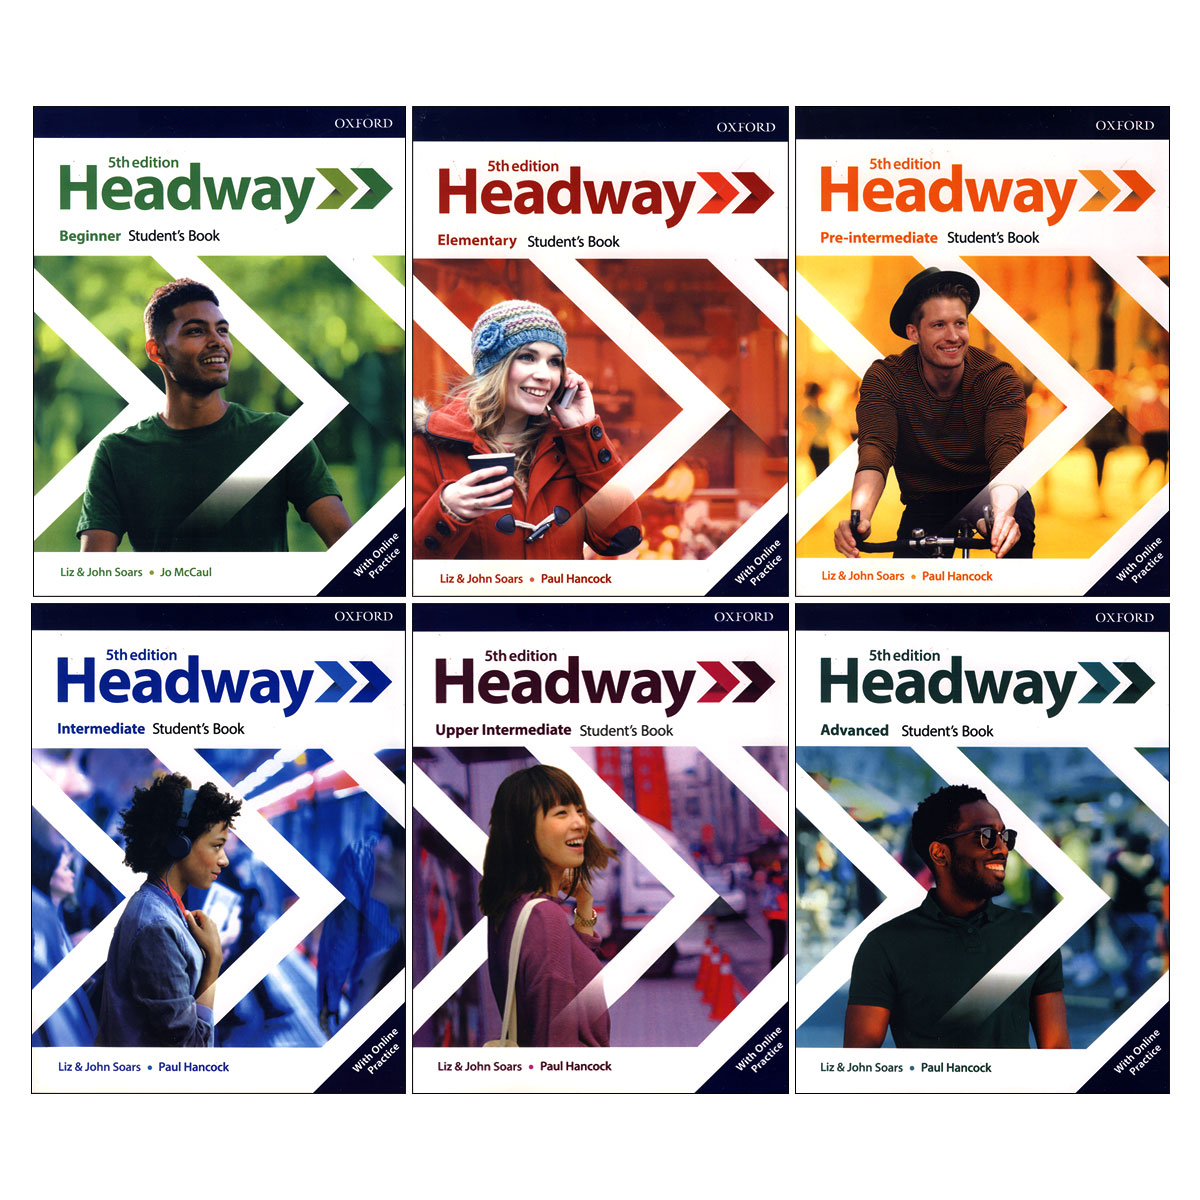 New headway 5th edition. Oxford 5th Edition Headway. Headway 5 Edition pre-Intermediate. Headway Elementary student's book 5th. Headway Beginner Workbook 5th.